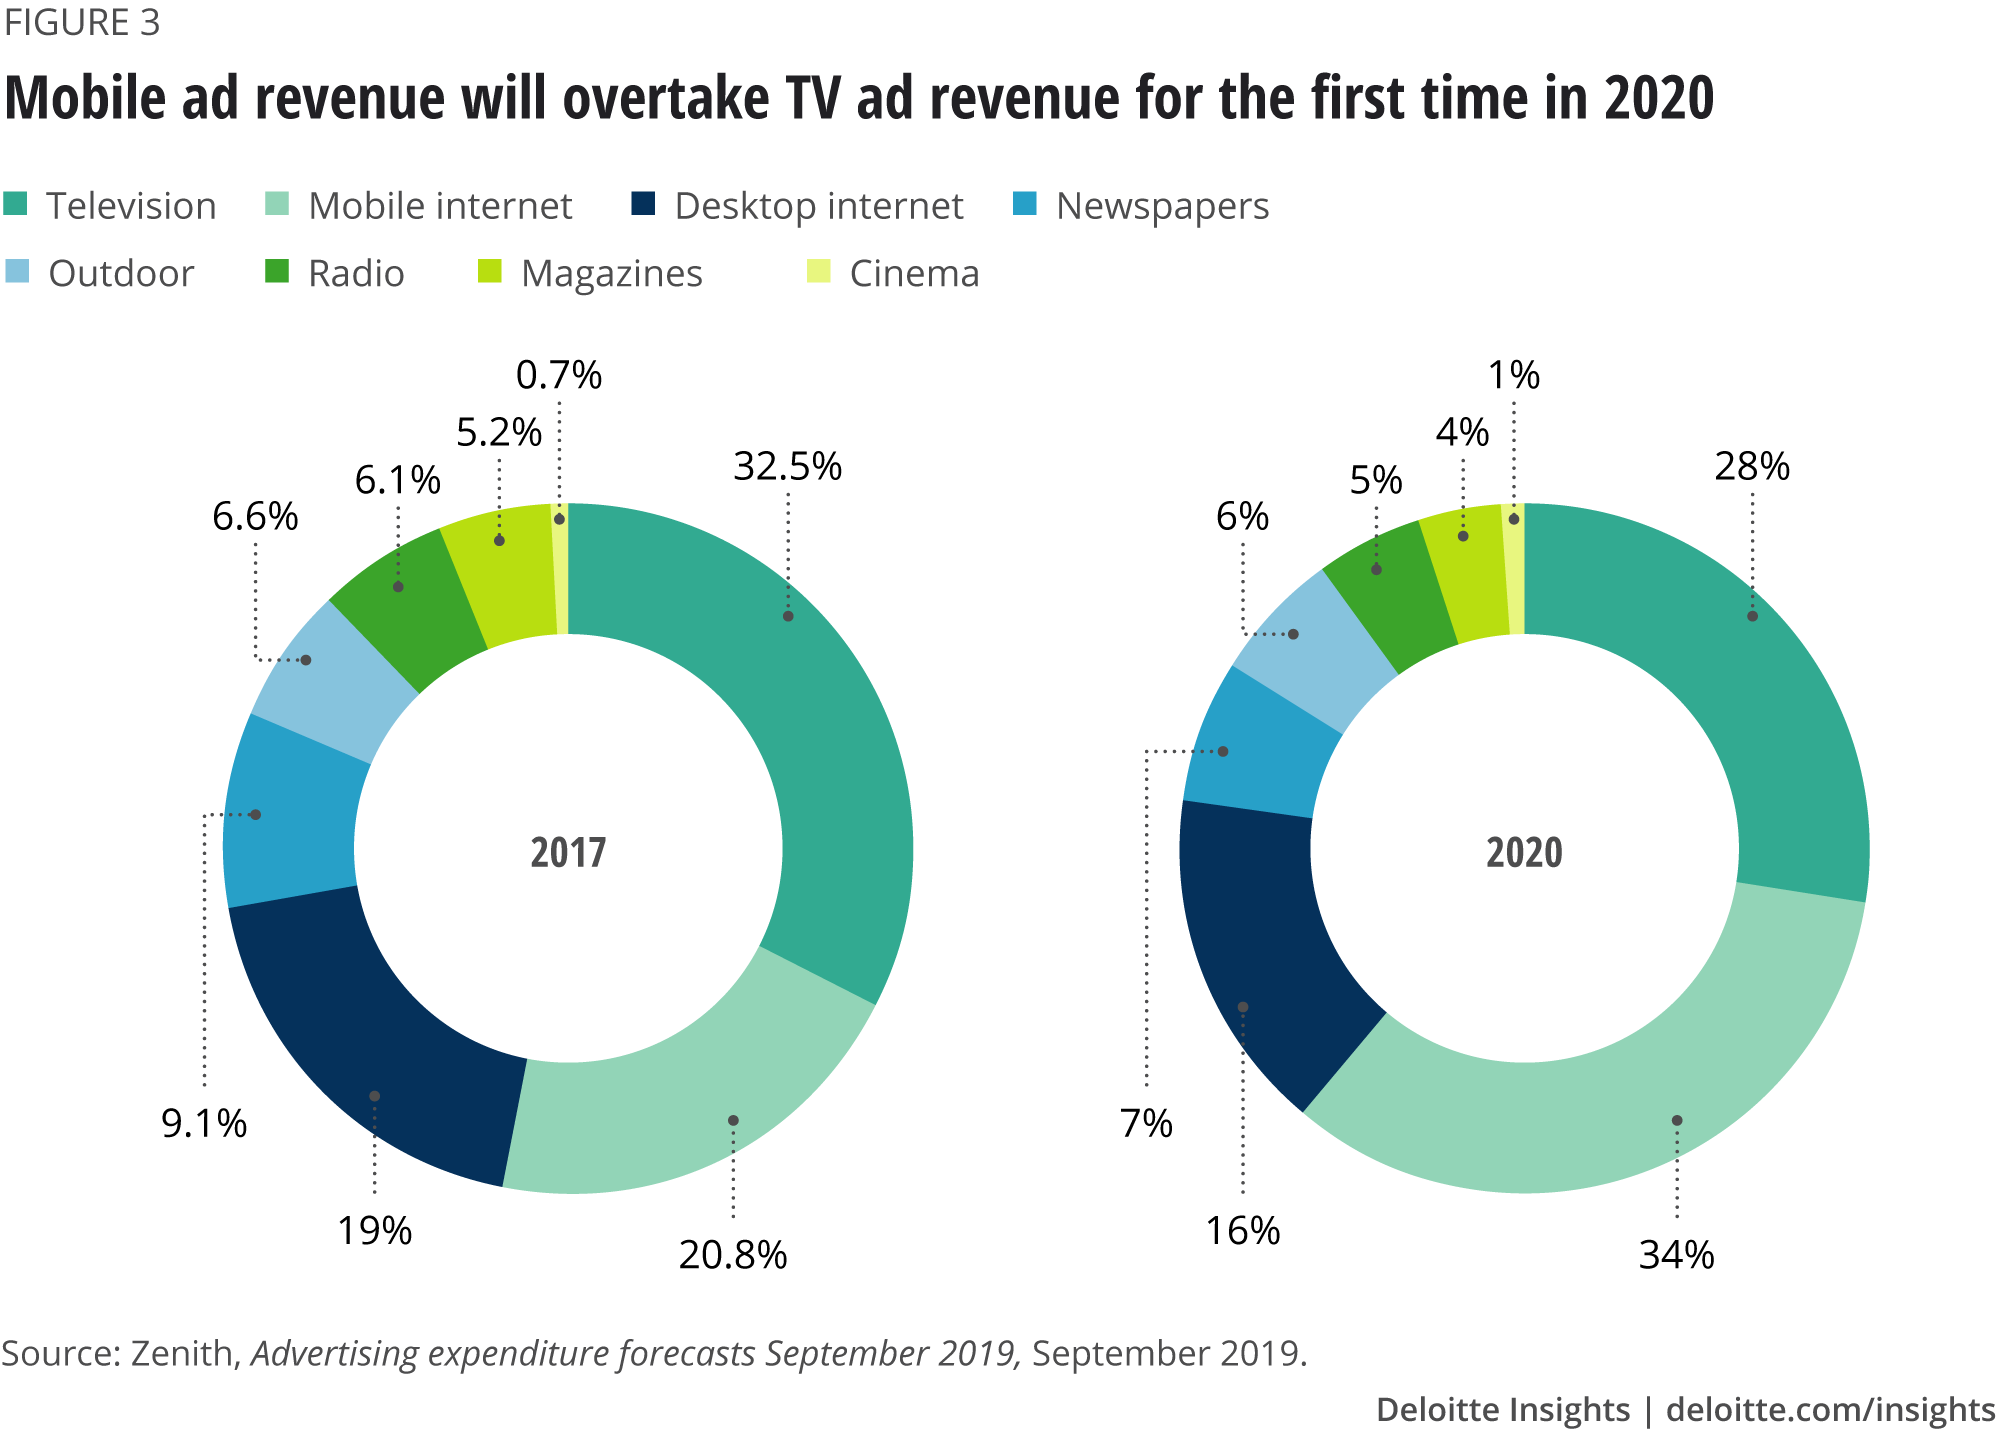 Mobile ad revenue will overtake TV ad revenue for the first time in 2020